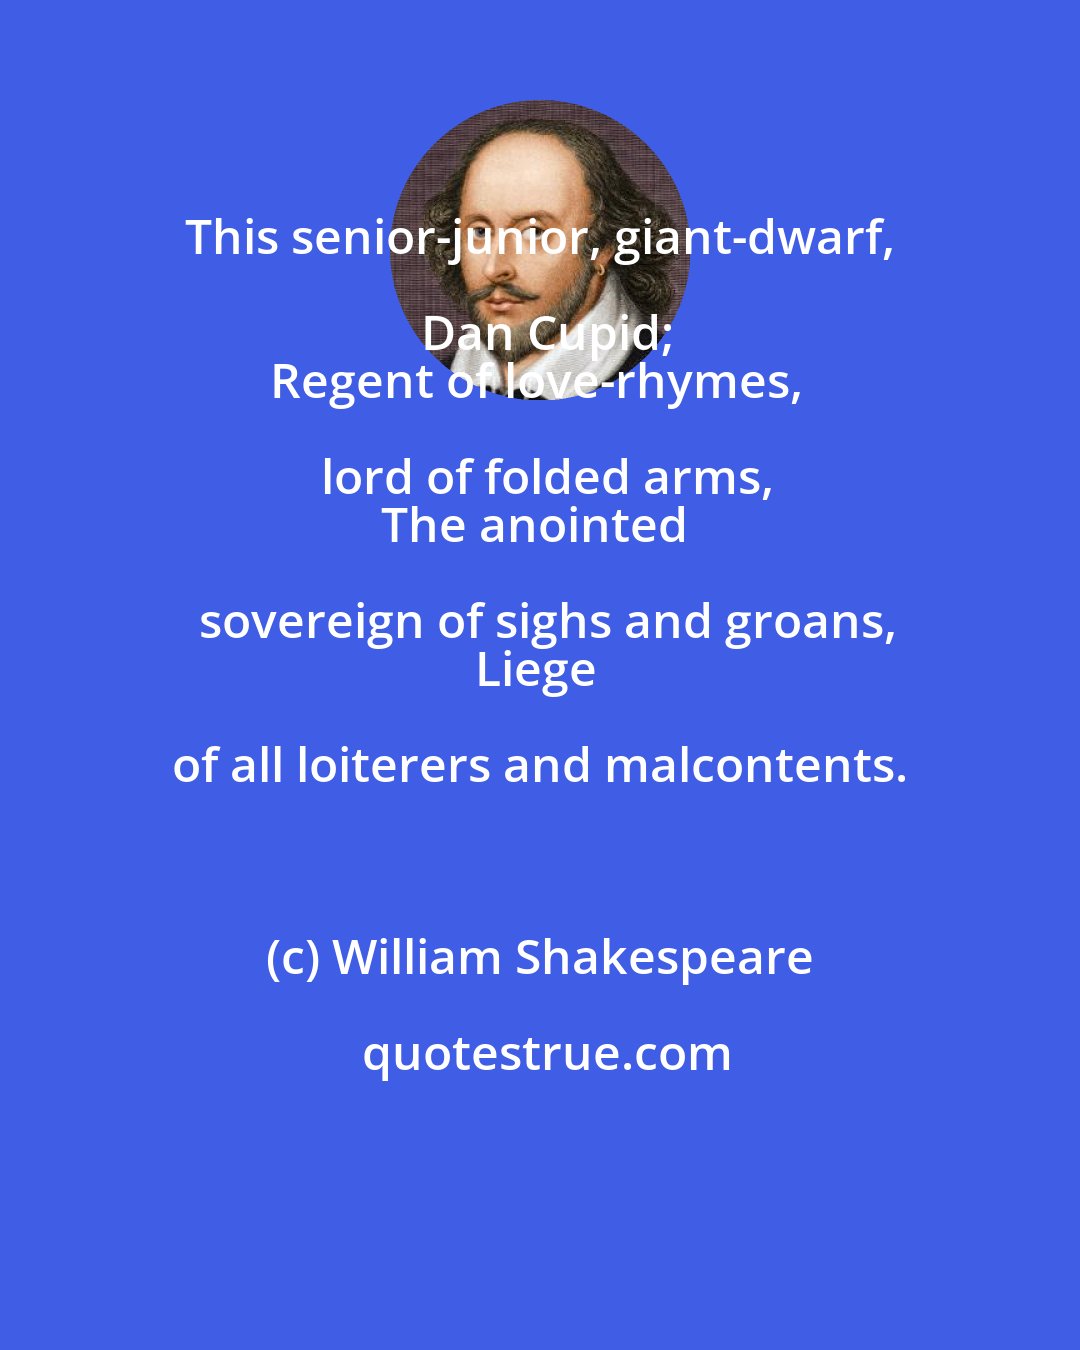 William Shakespeare: This senior-junior, giant-dwarf, Dan Cupid;
Regent of love-rhymes, lord of folded arms,
The anointed sovereign of sighs and groans,
Liege of all loiterers and malcontents.